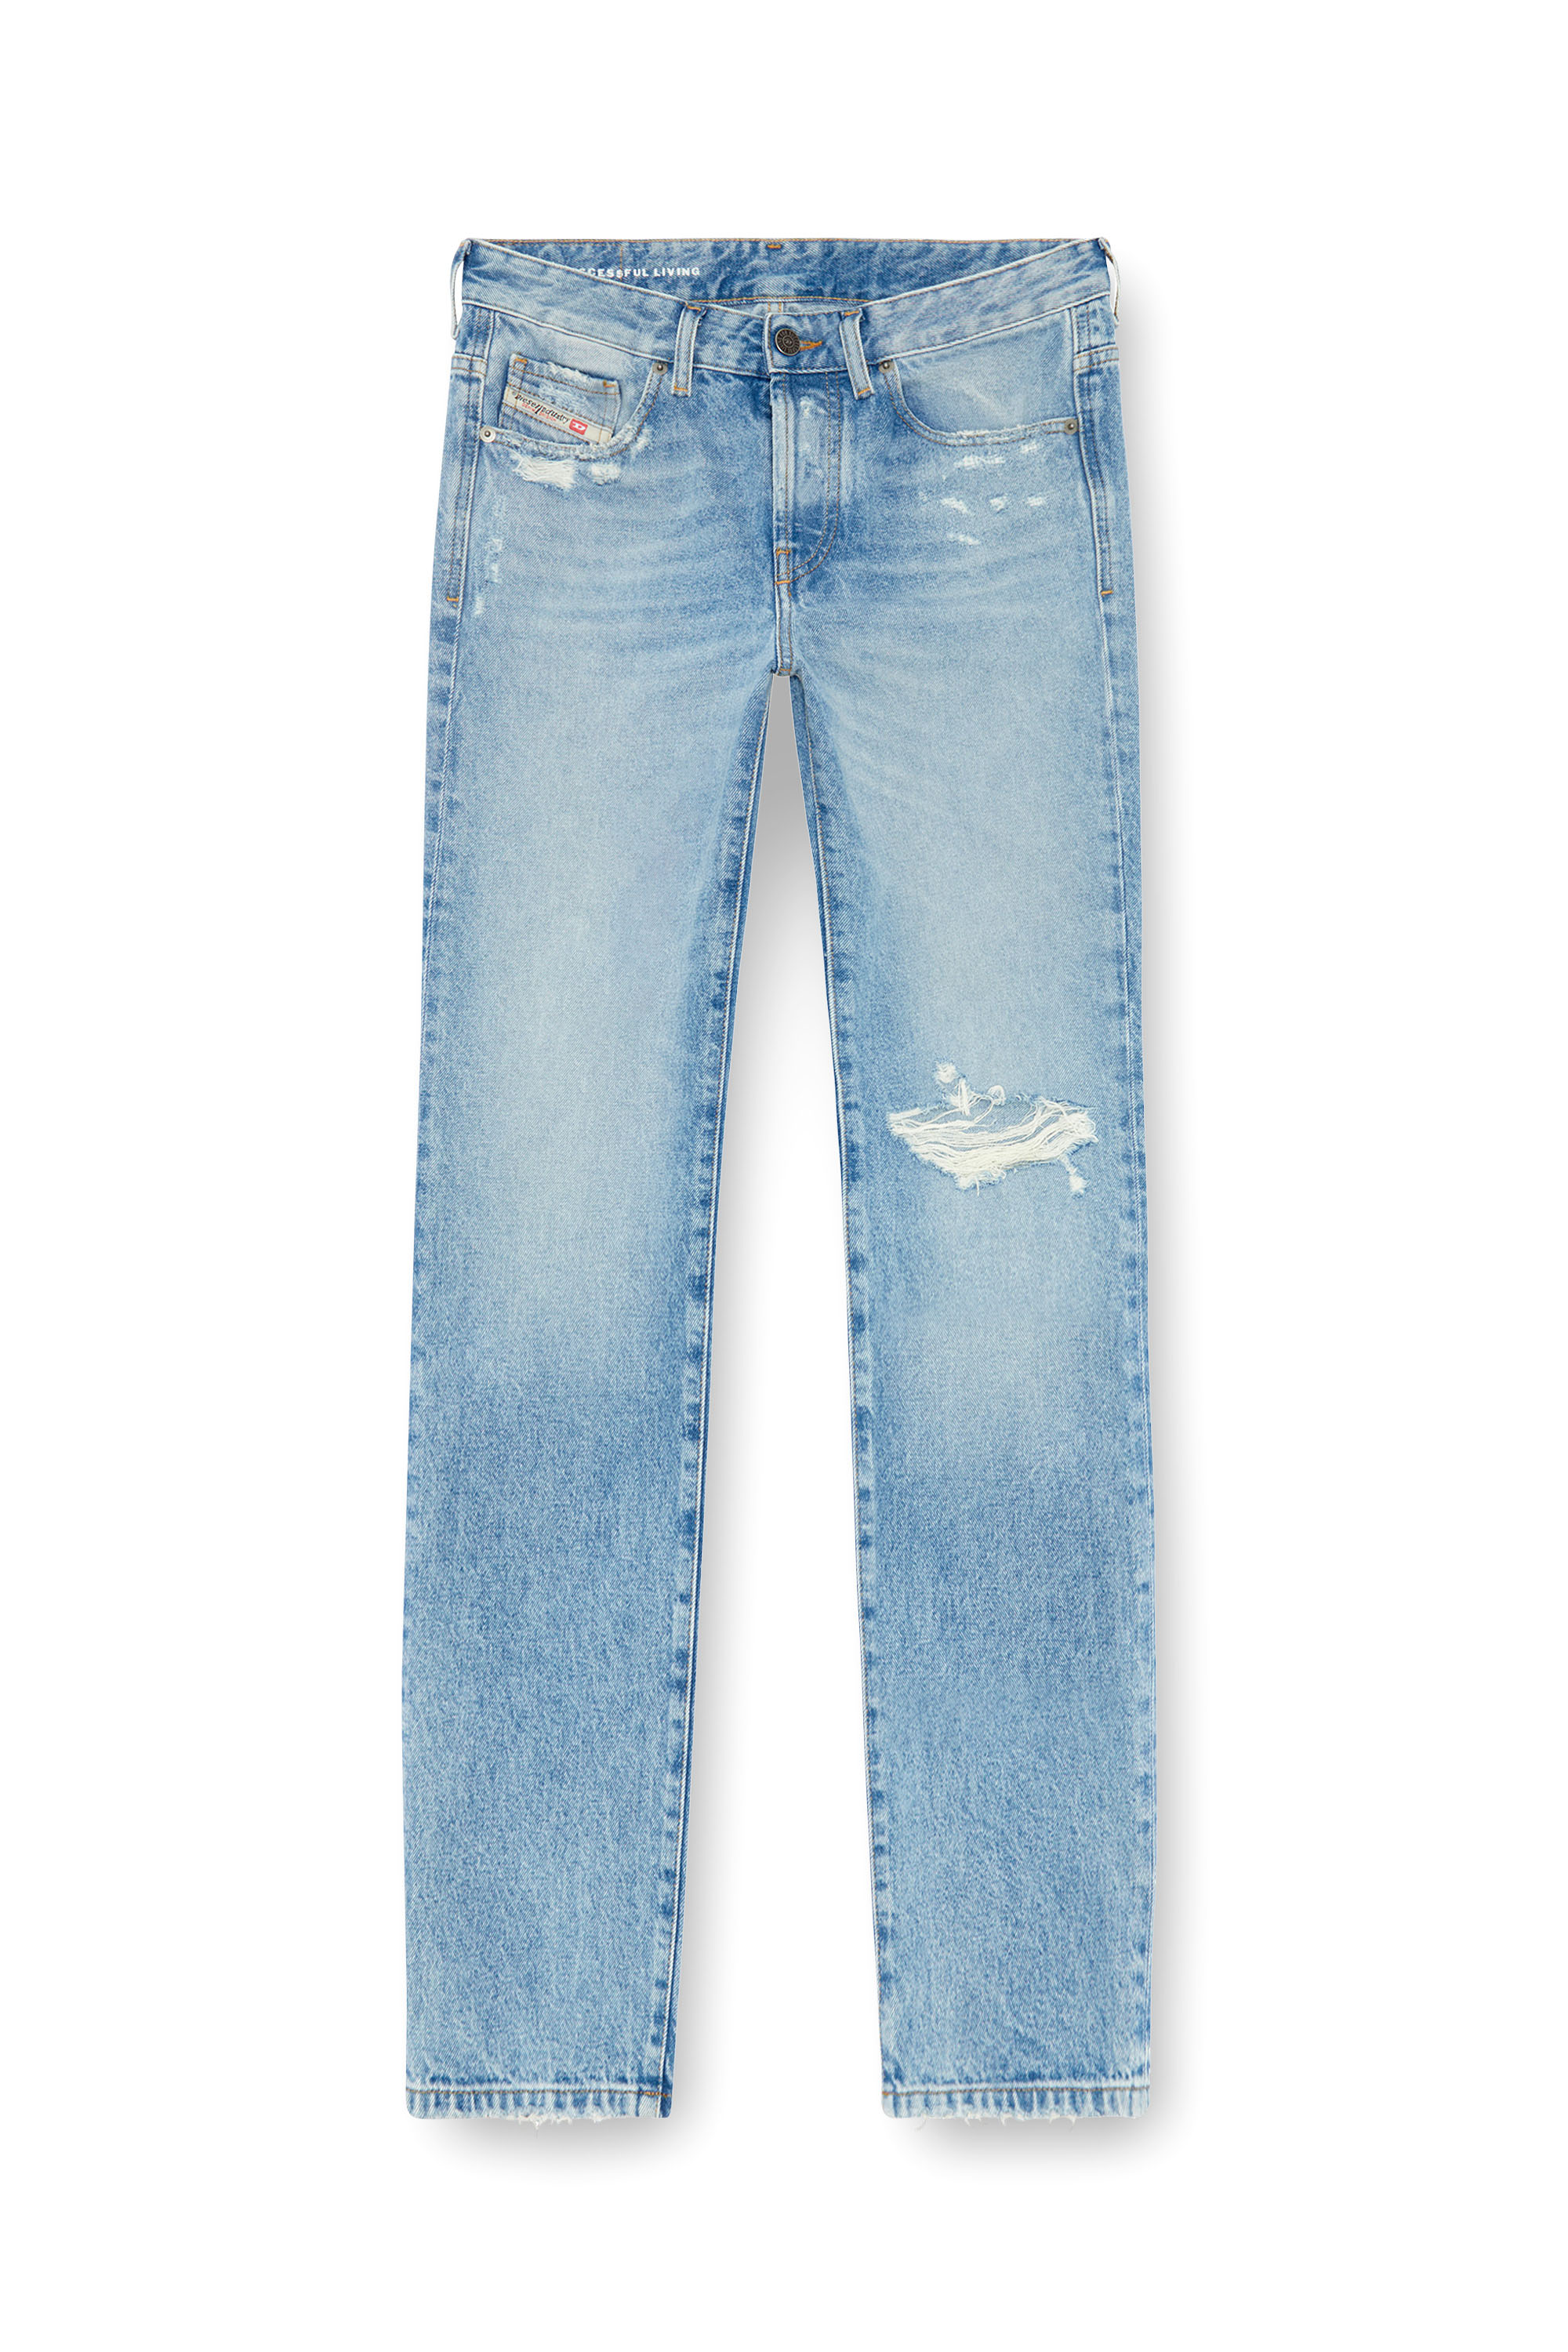 Diesel - Straight Jeans 1989 D-Mine 09J80, Mujer Straight Jeans - 1989 D-Mine in Azul marino - Image 5